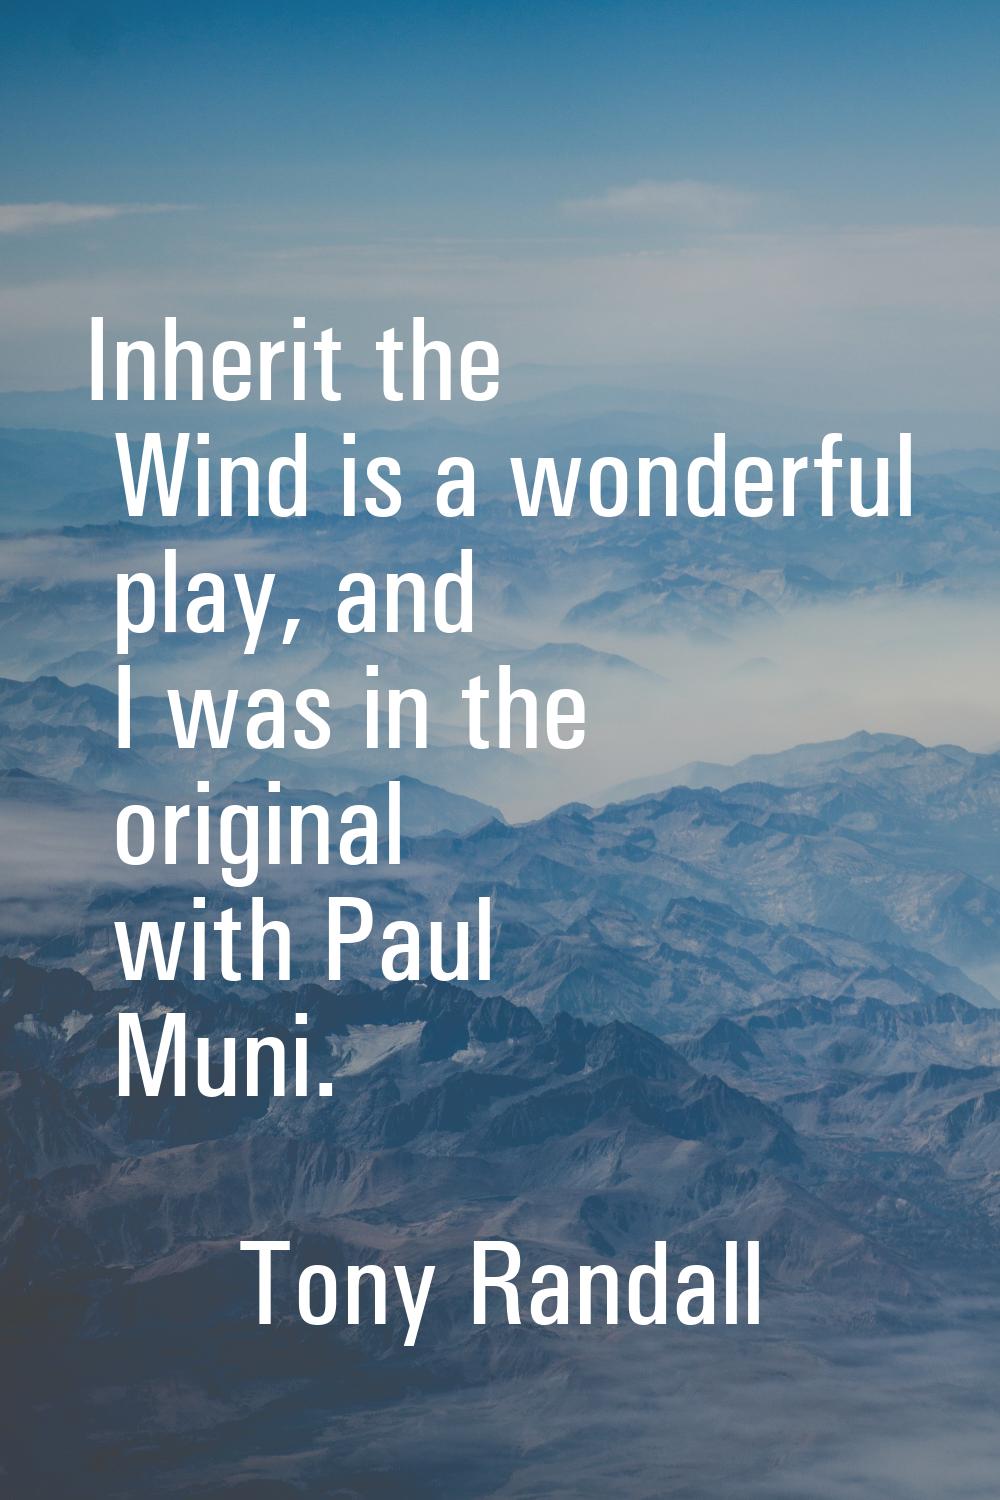 Inherit the Wind is a wonderful play, and I was in the original with Paul Muni.